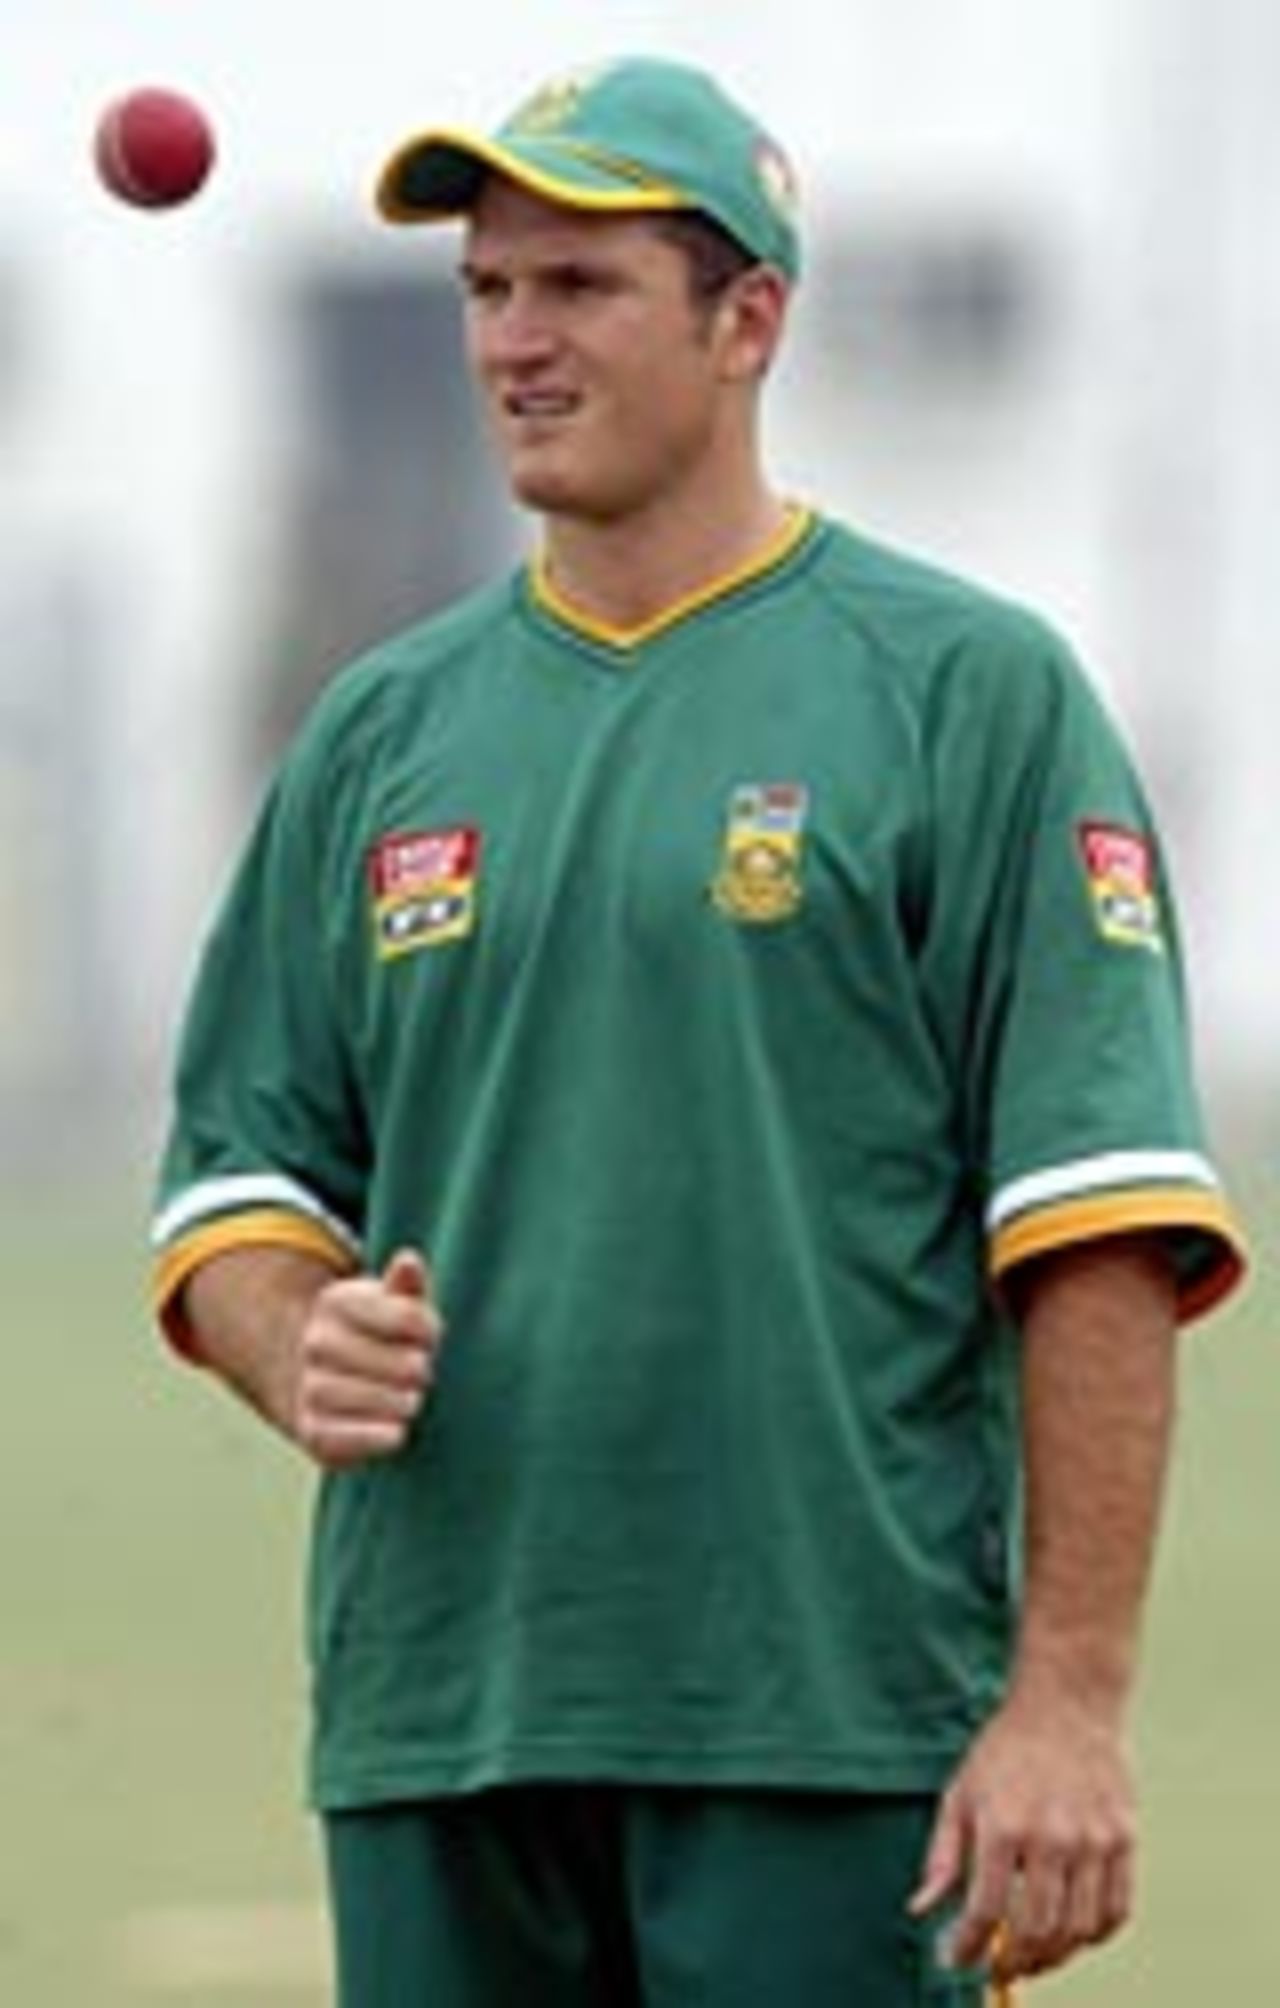 Graeme Smith warms up ahead of the first Test at Kanpur against India, November 2004